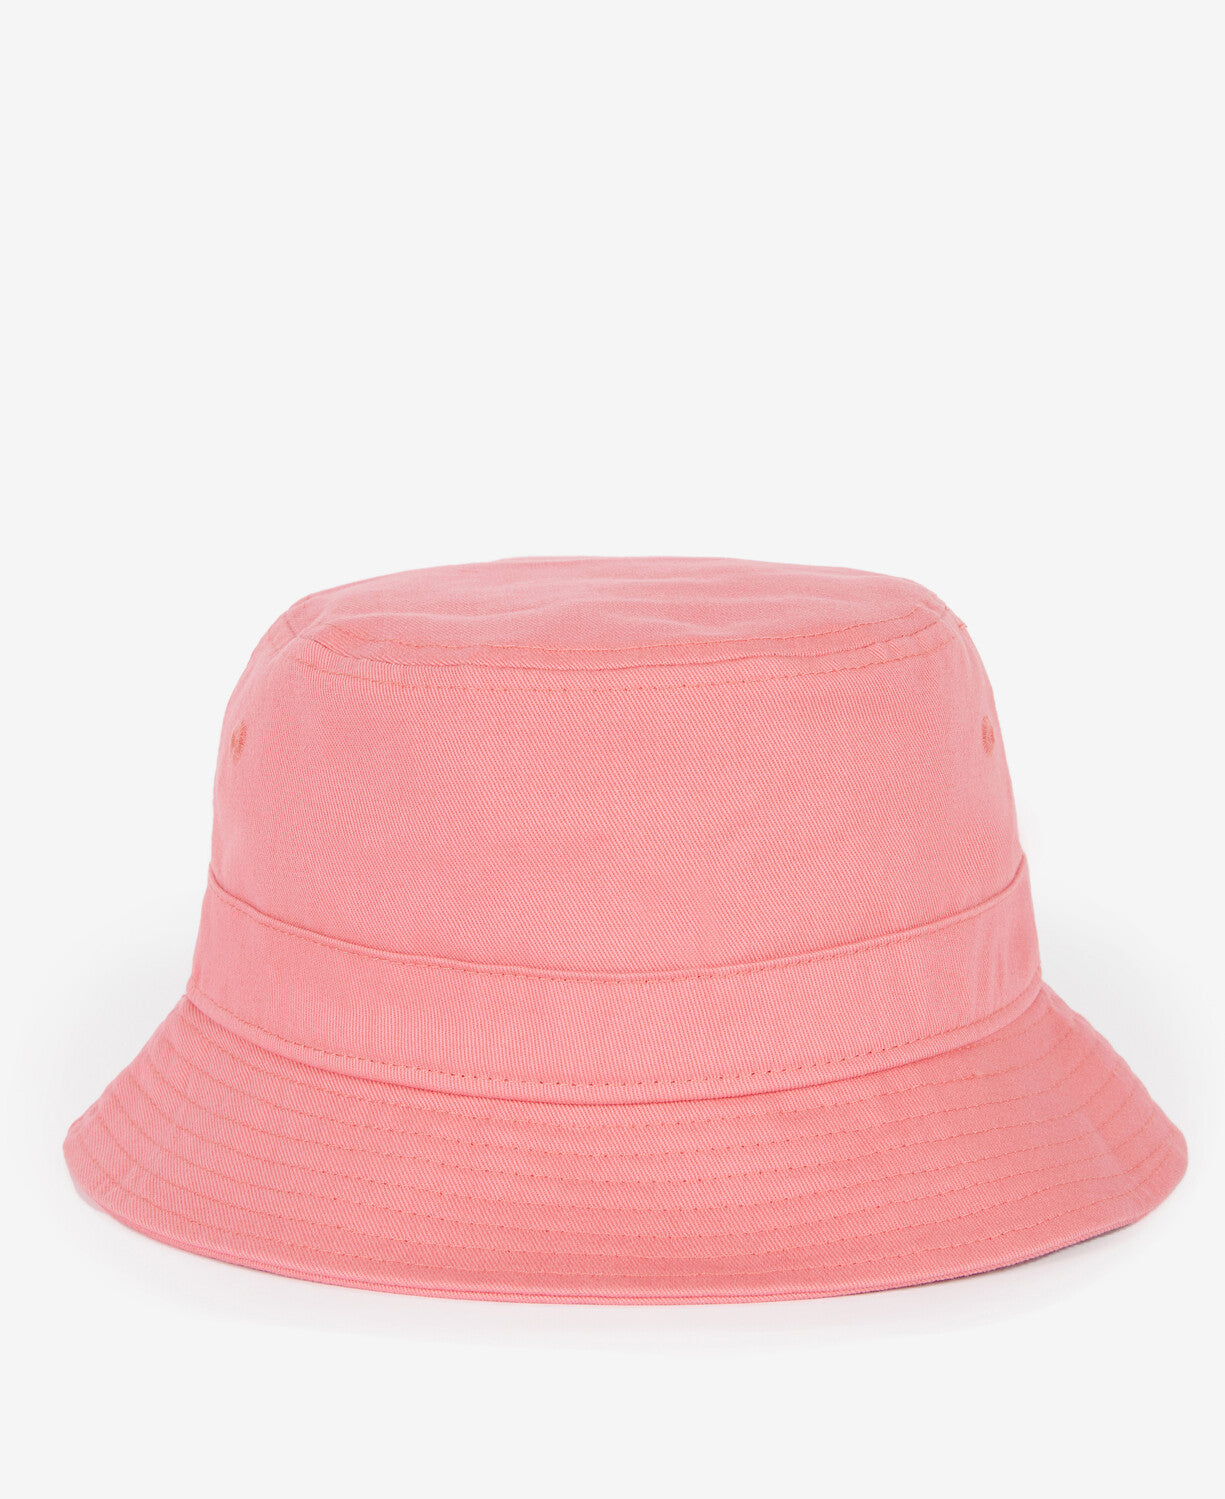 Barbour Olivia Sports Hat - Pink Punch